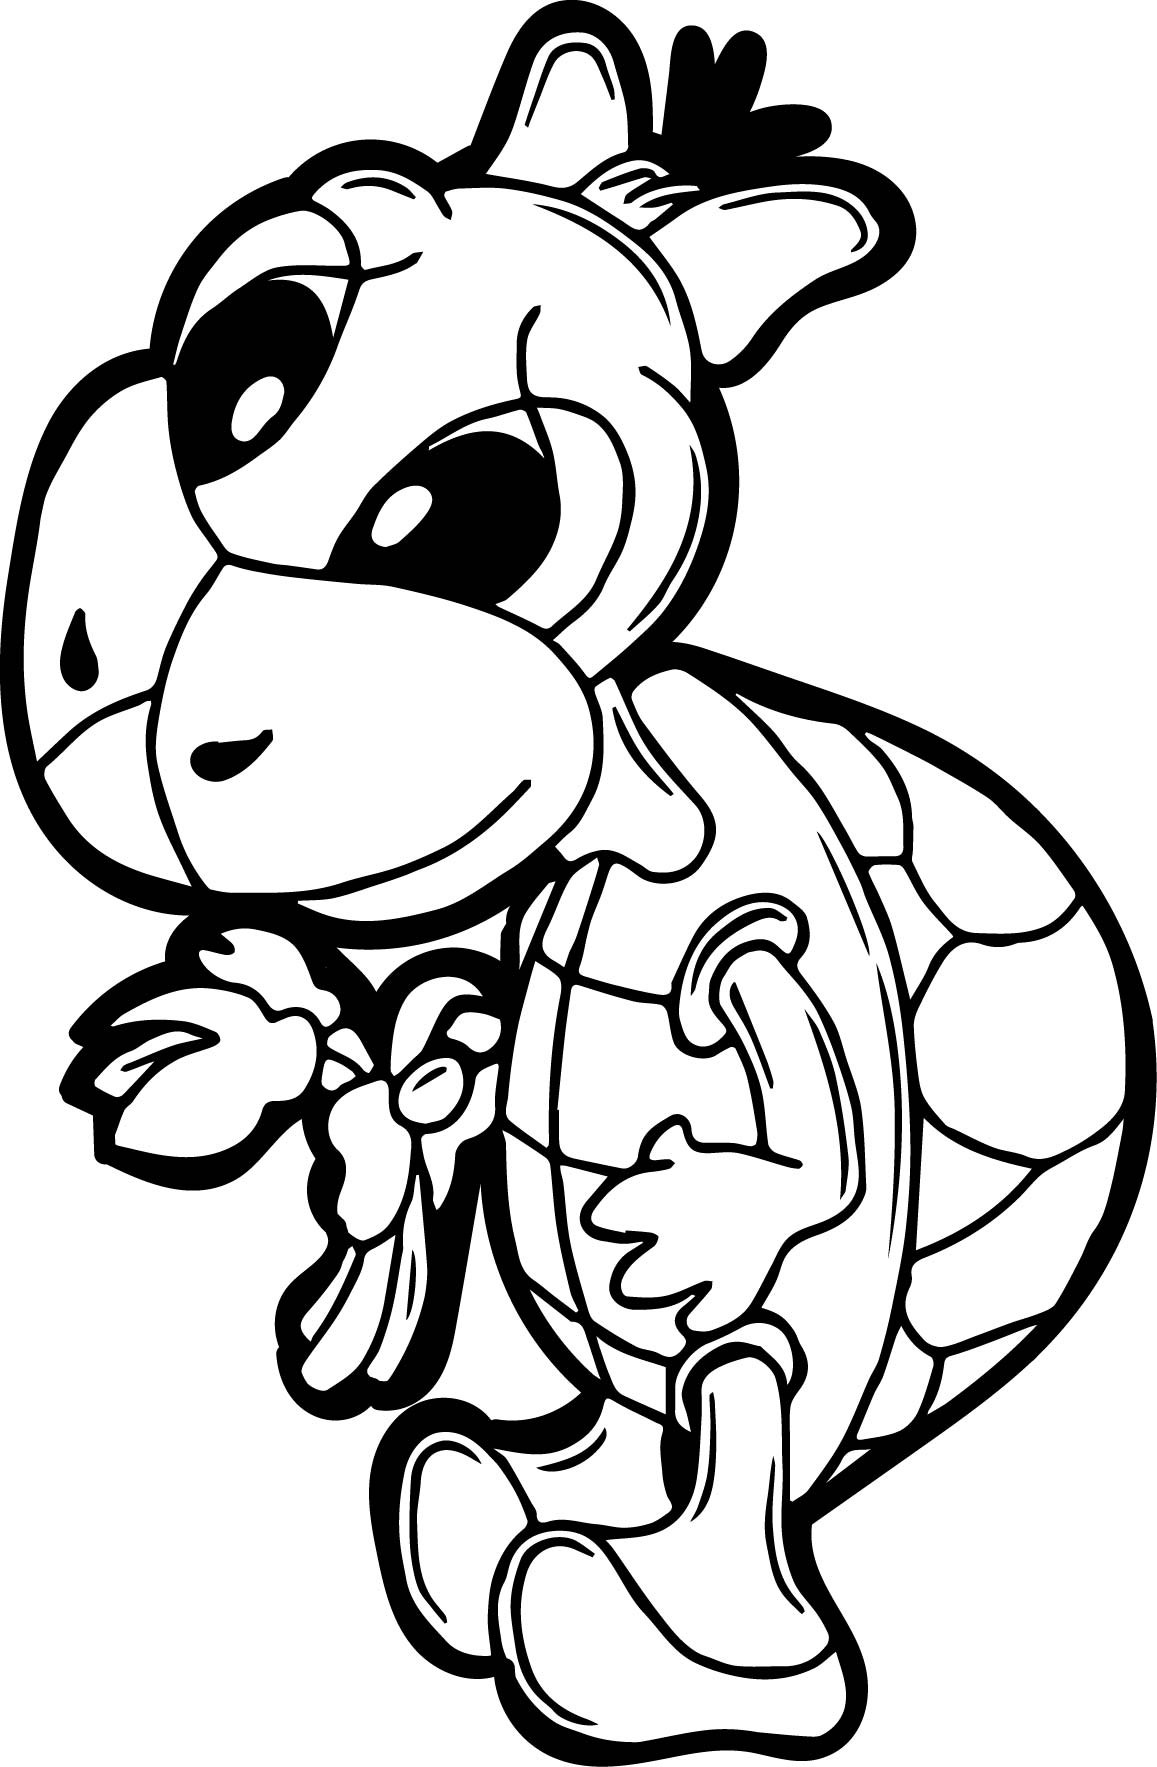 Girl Turtle Coloring Pages
 Girl Tortoise Turtle Coloring Page